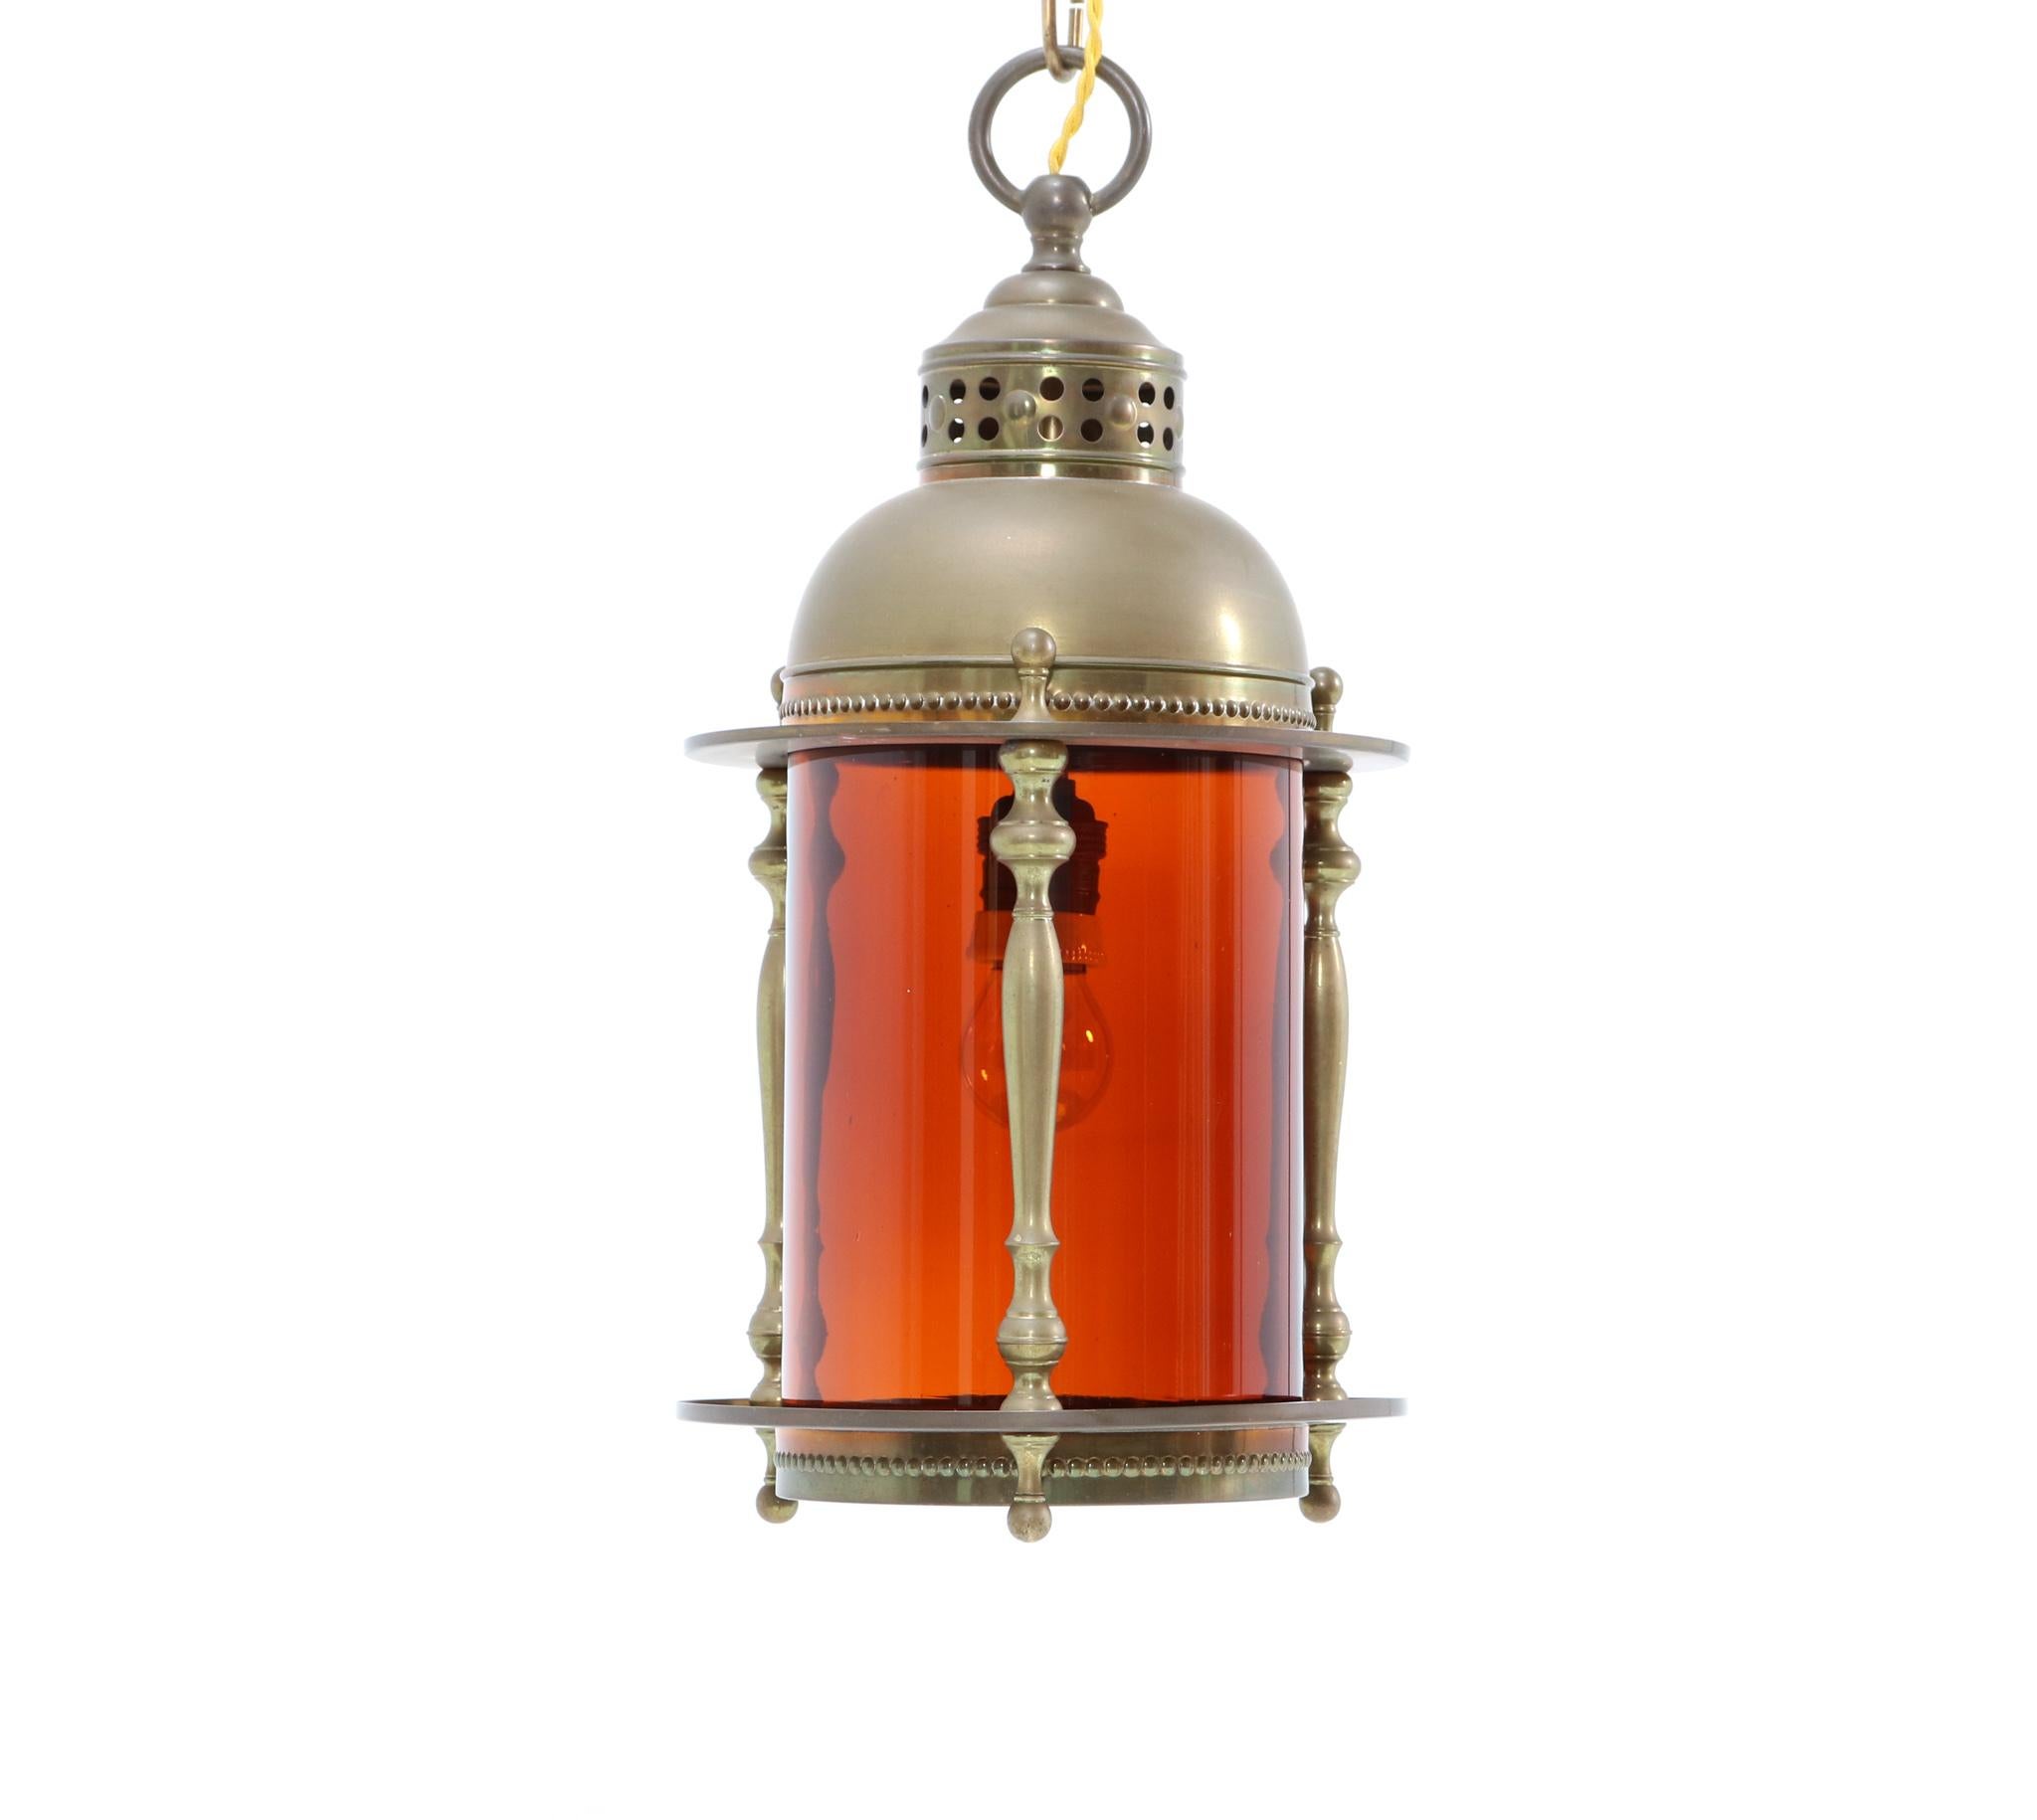 Early 20th Century Patinated Brass Art Nouveau Lantern with Original Glass Shade, 1900s For Sale